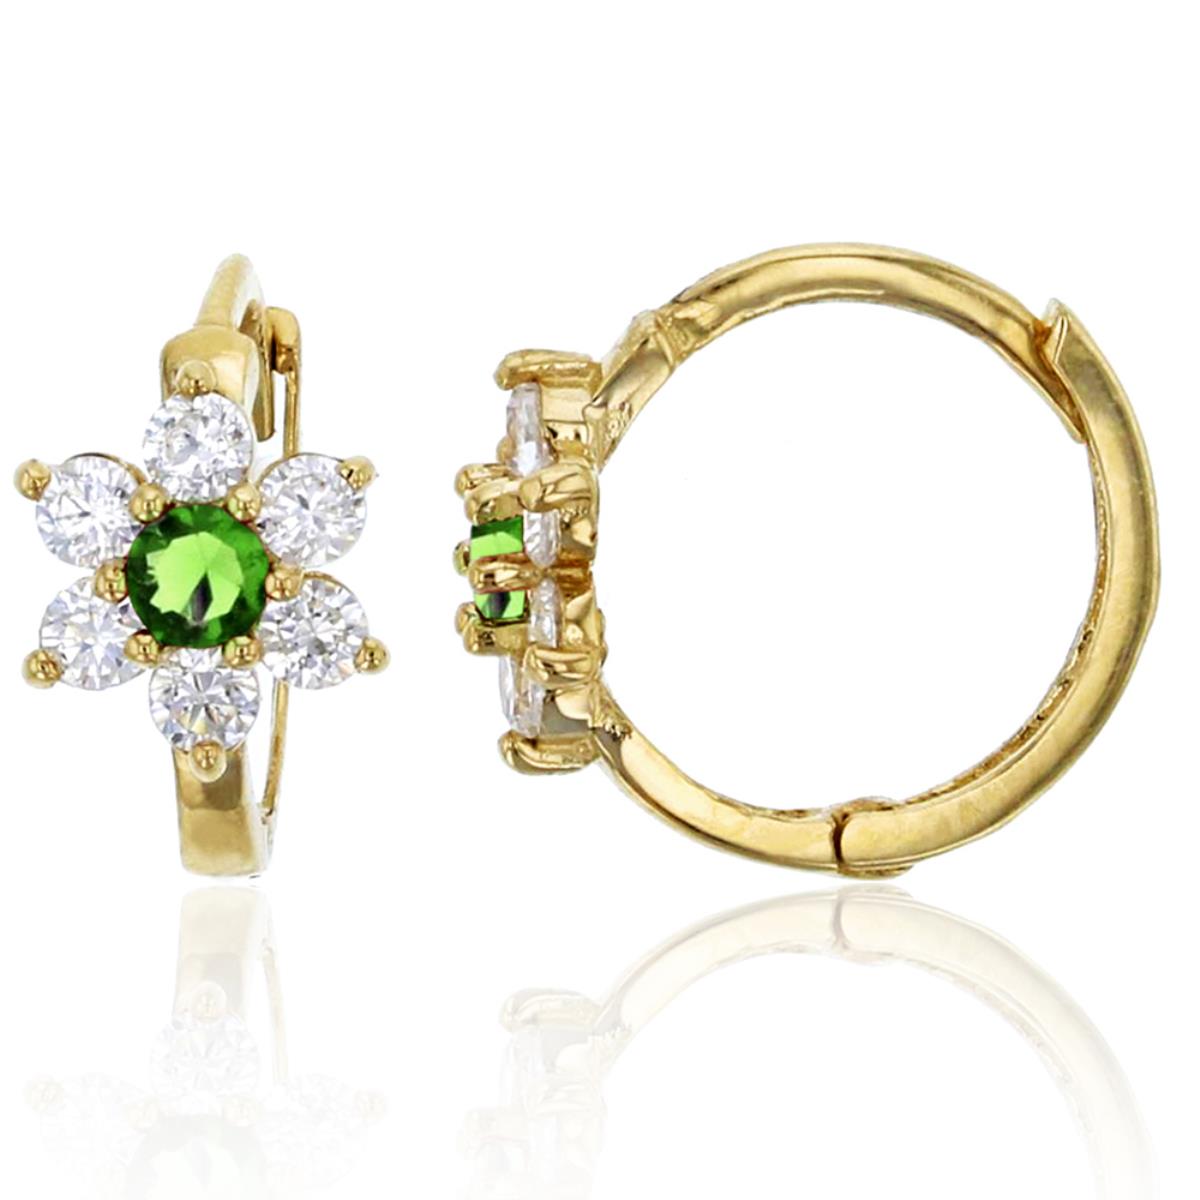 14K Yellow Gold 6.5x10mm Clear and Green Emerald CZ Daisy Flower Huggie Earring